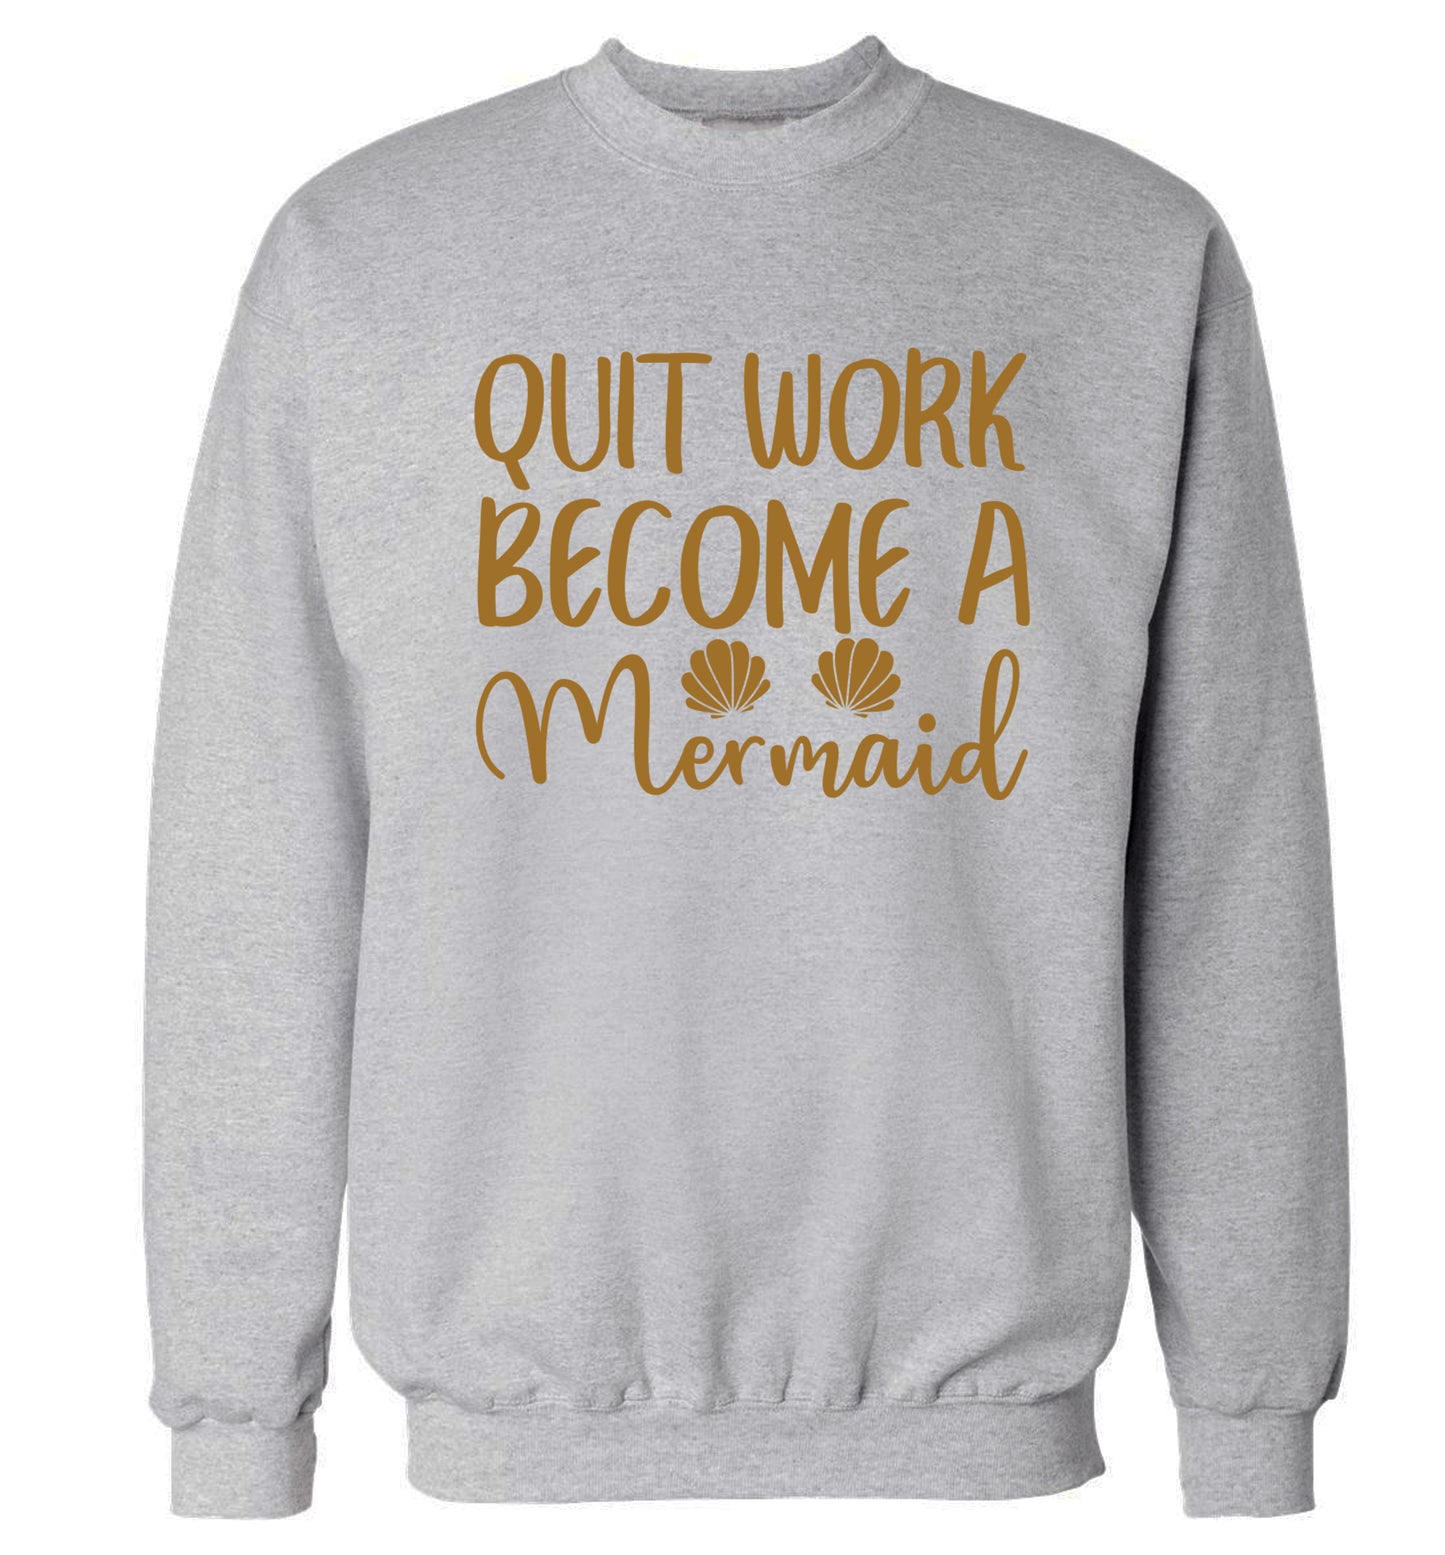 Quit work become a mermaid Adult's unisex grey Sweater 2XL